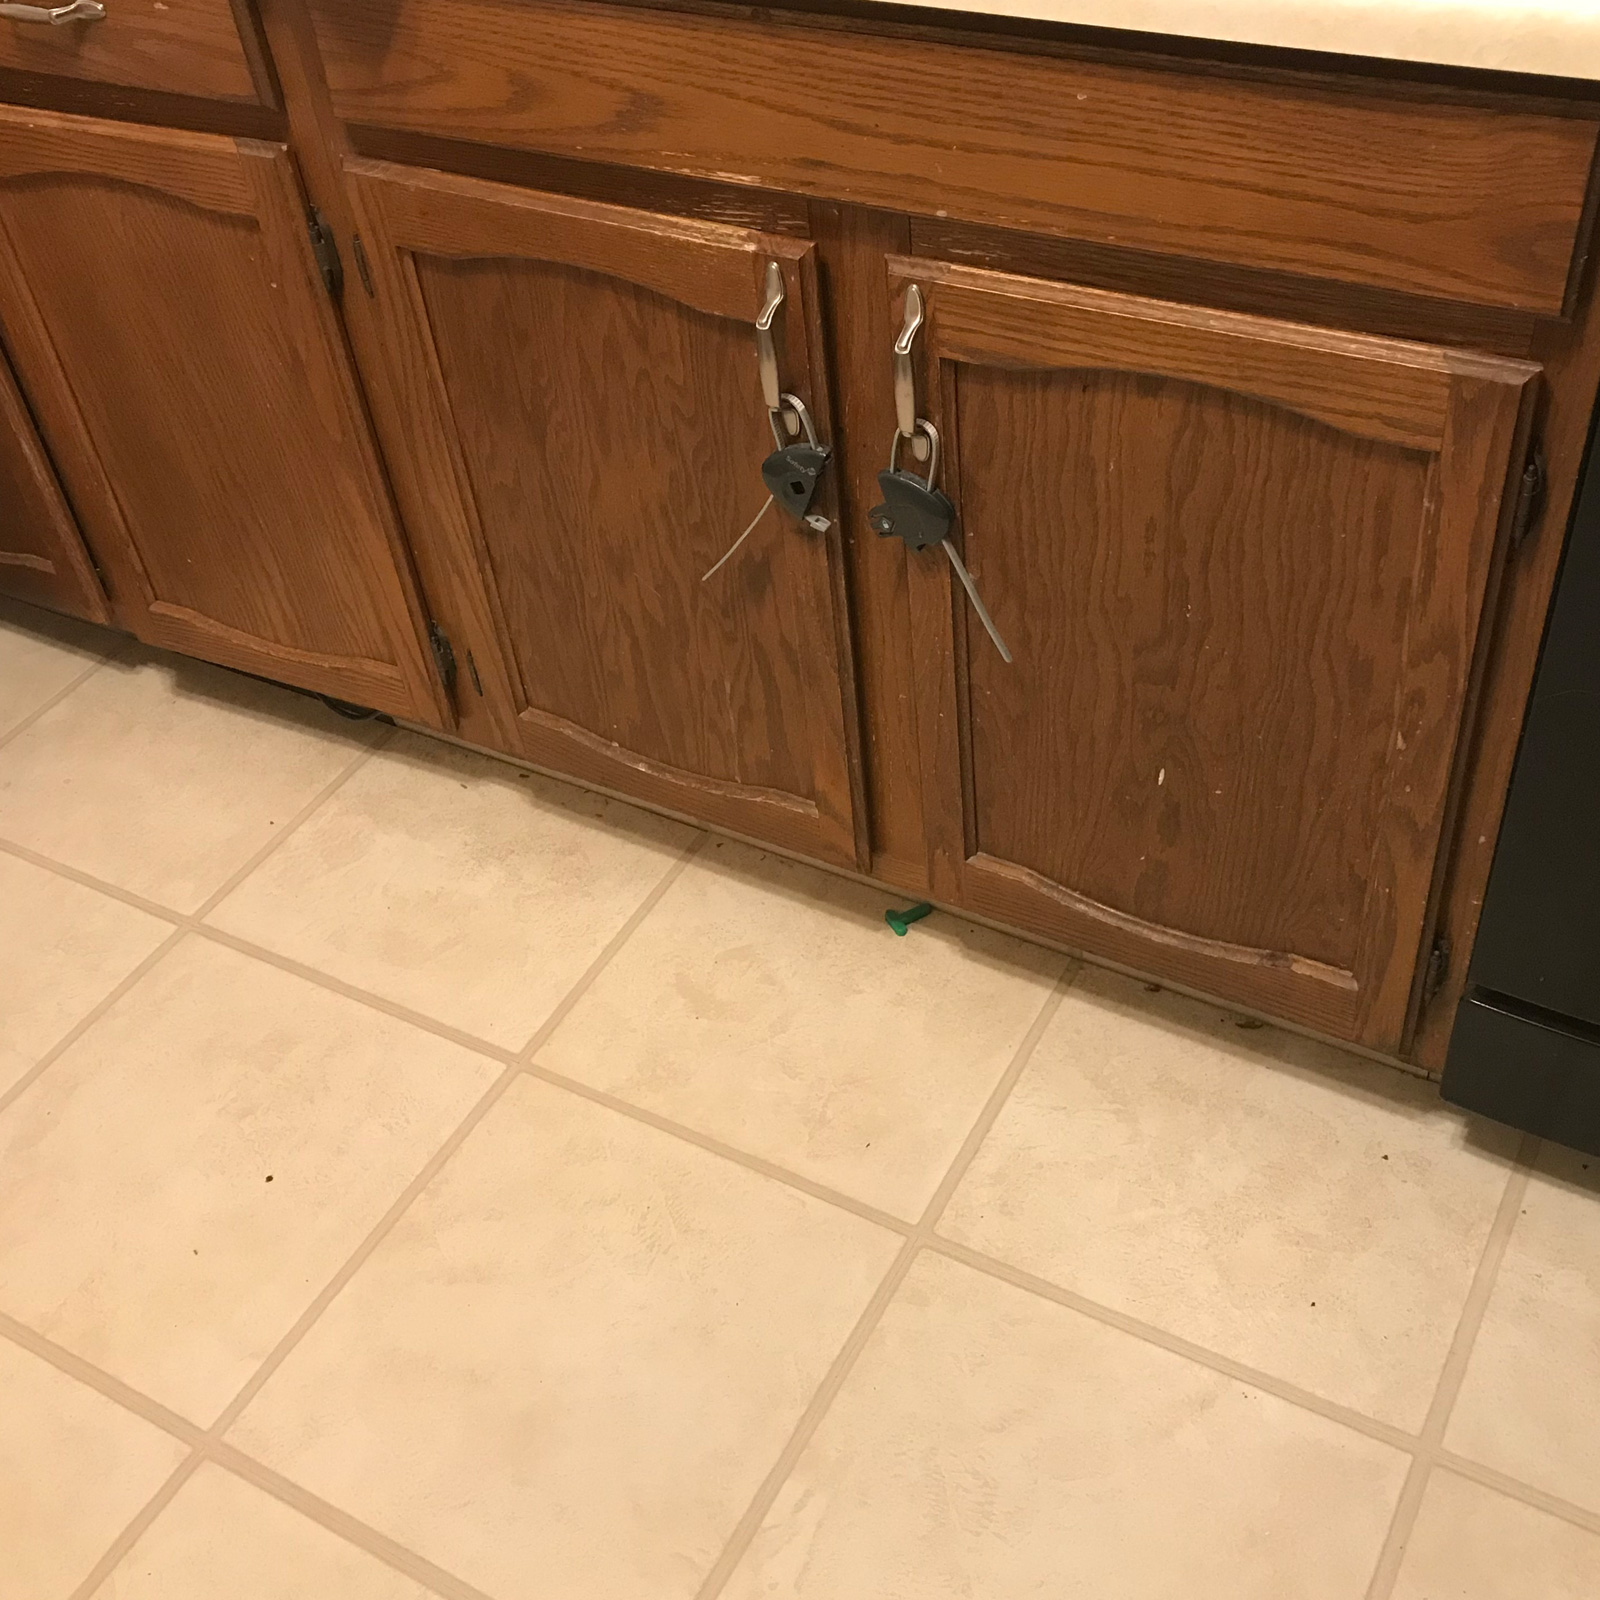 Entry 147 - These kitchen cabinets are looking old and worn-out-looking